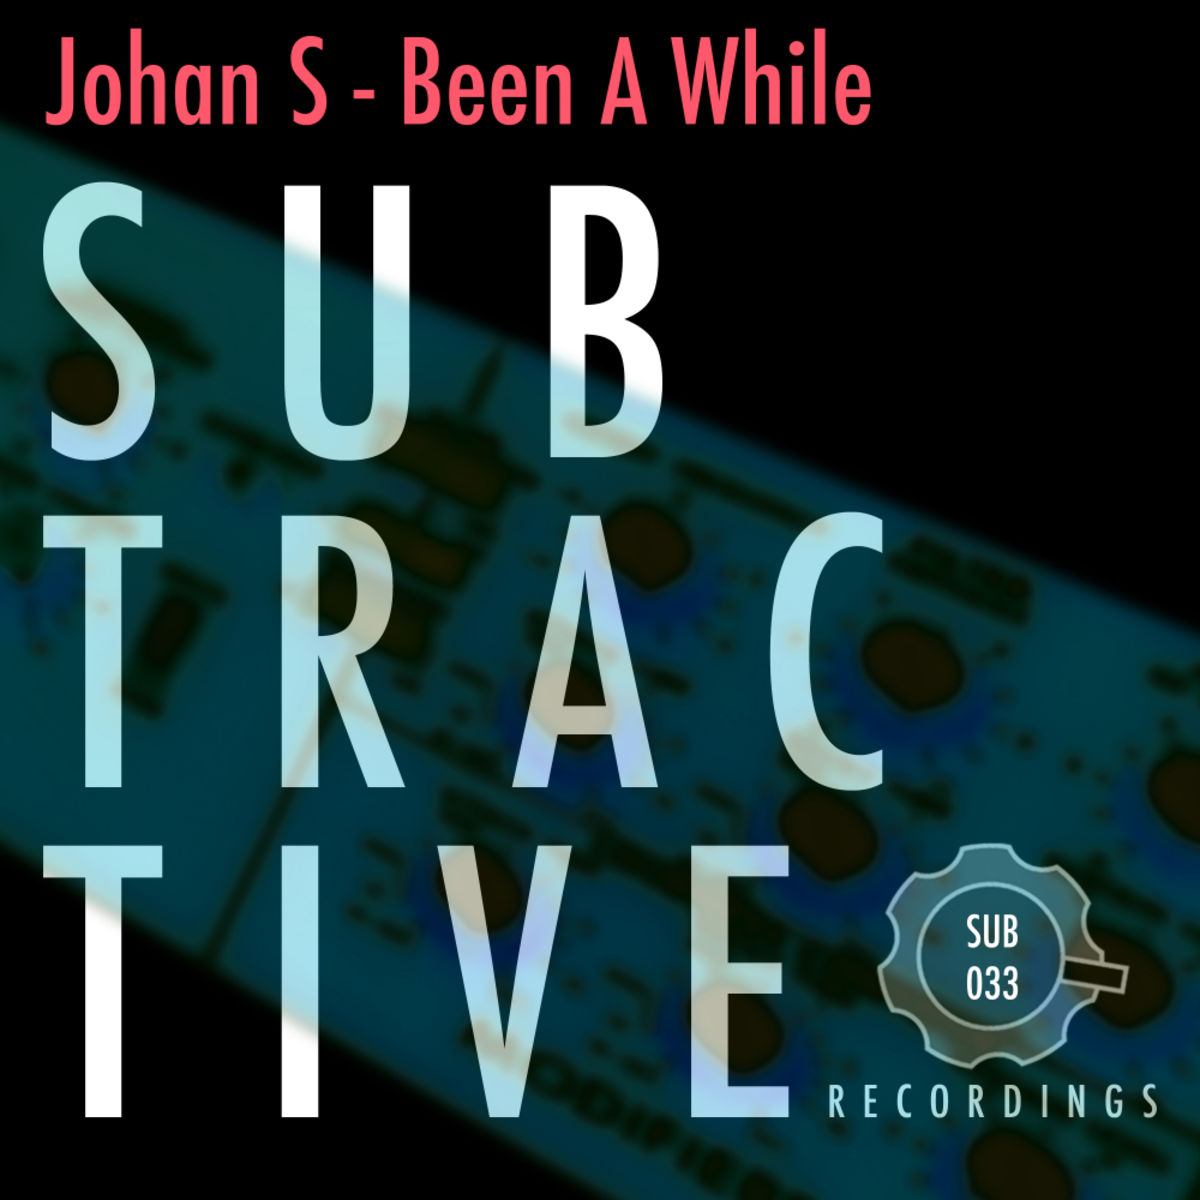 Johan S - Been A While / Subtractive Recordings